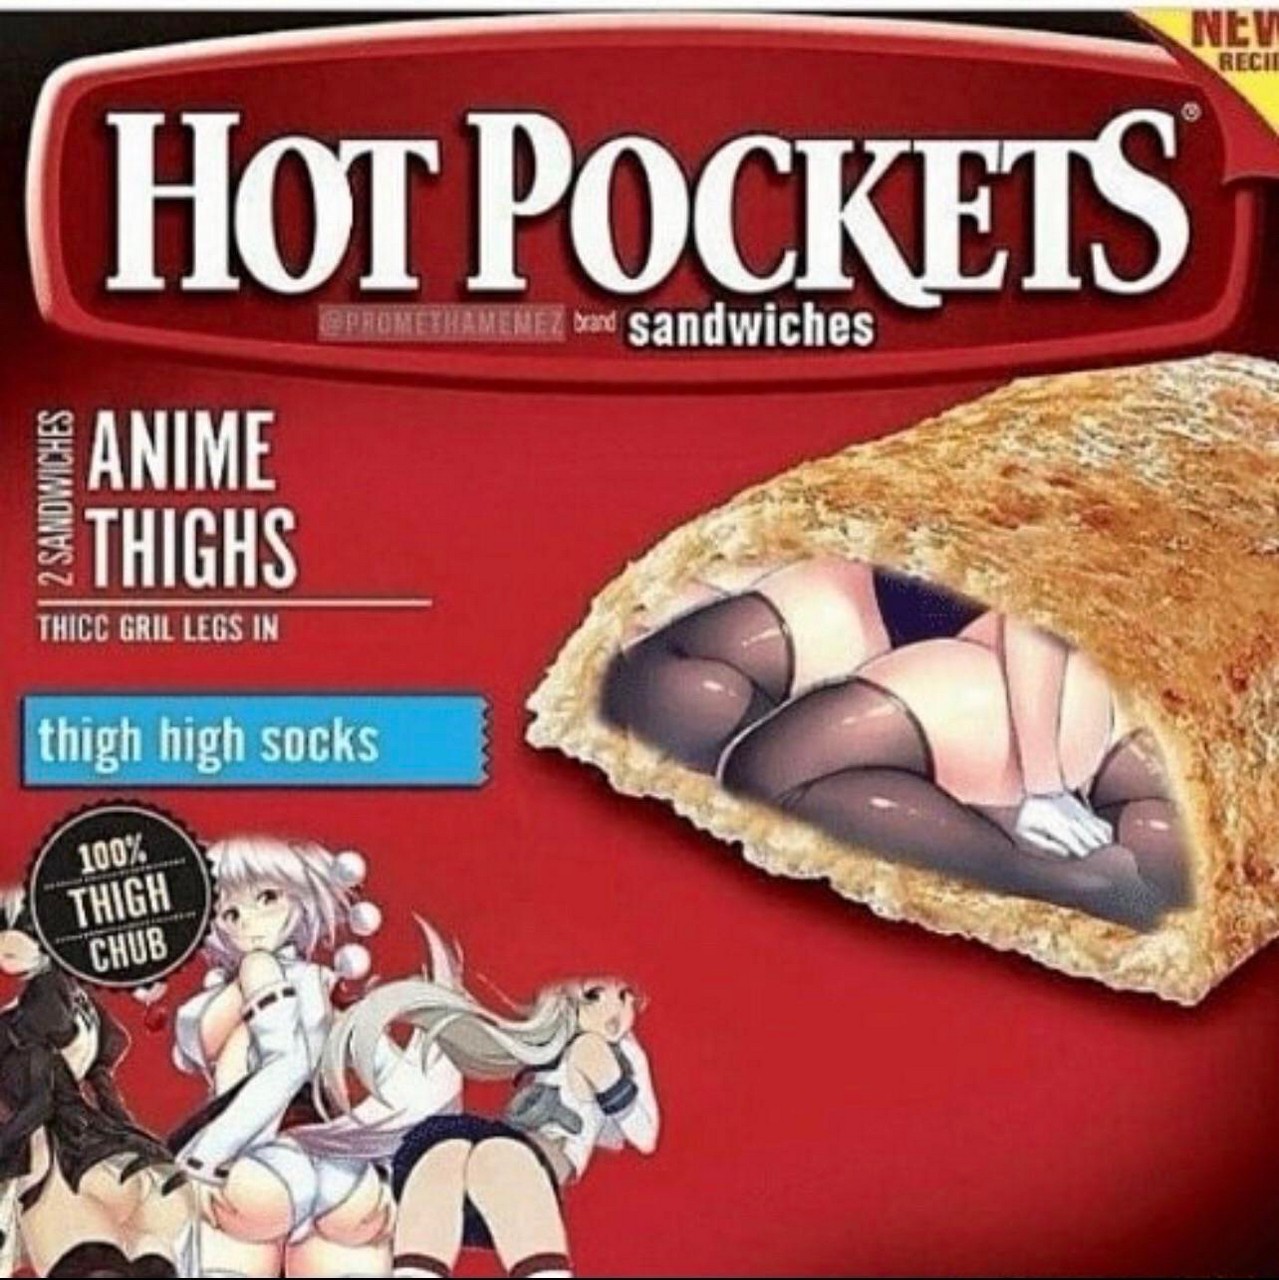 The Perfect Meal Thighdeolog